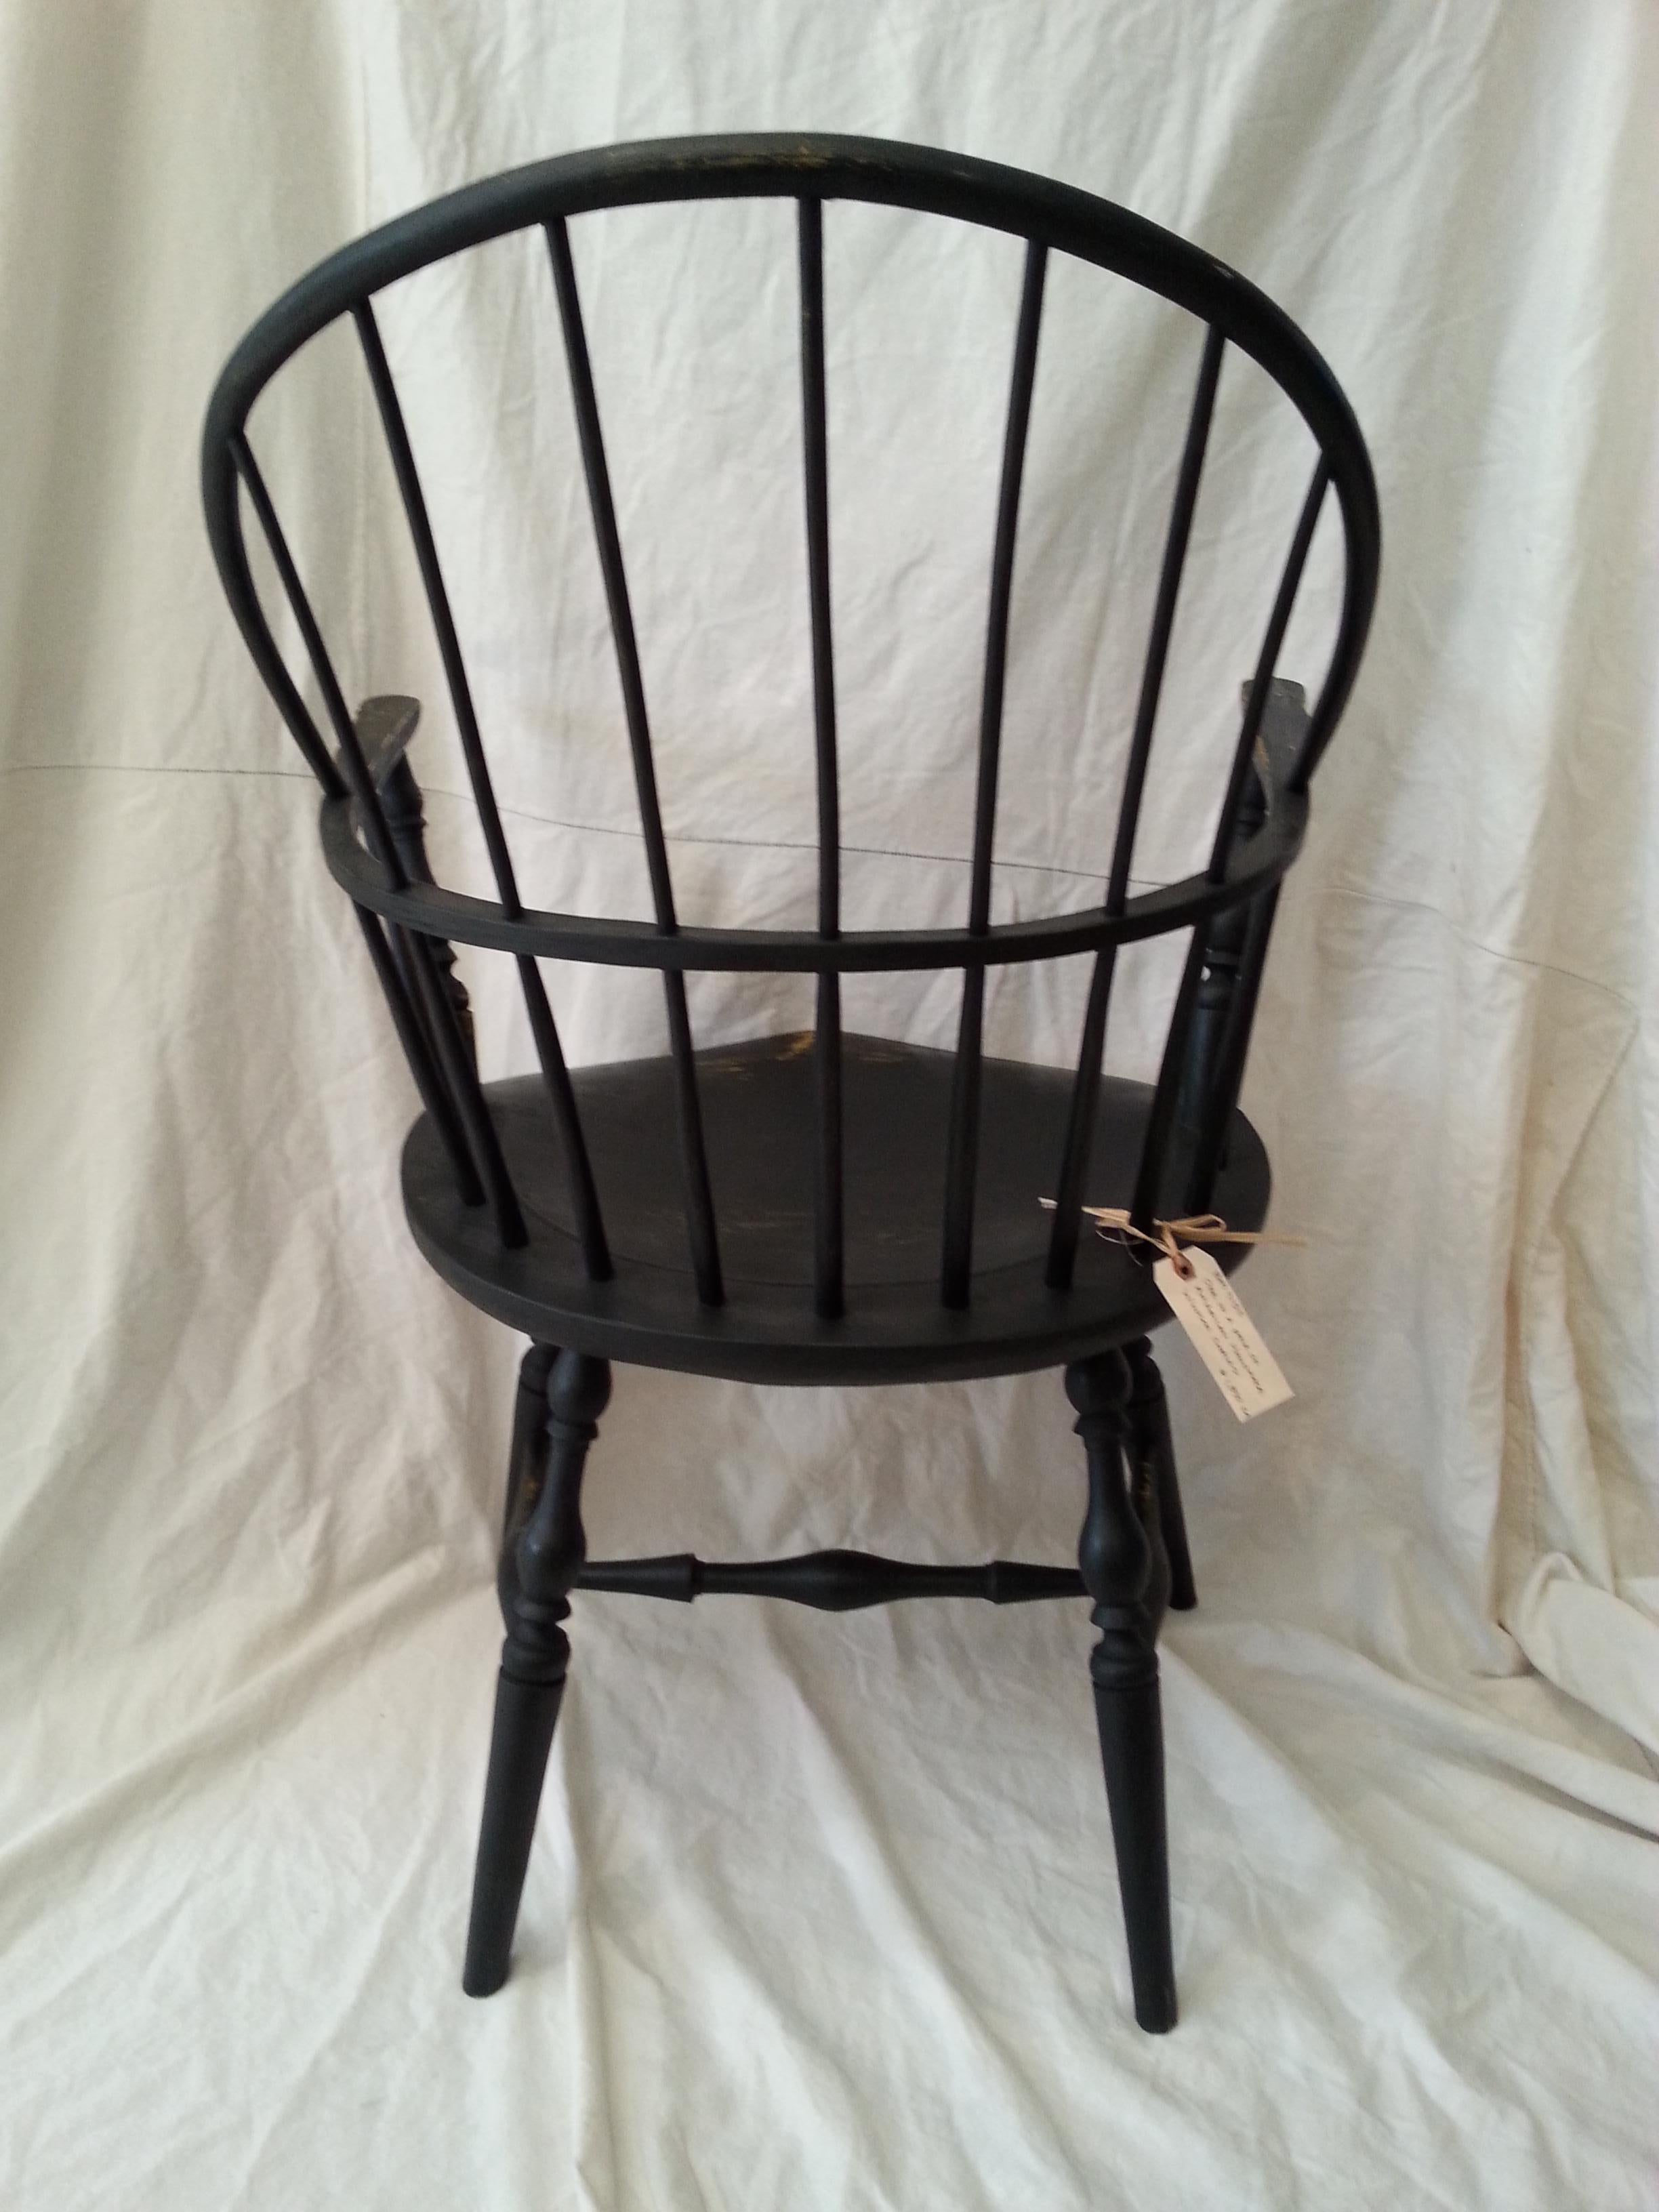 Reproduction black windsor chair.